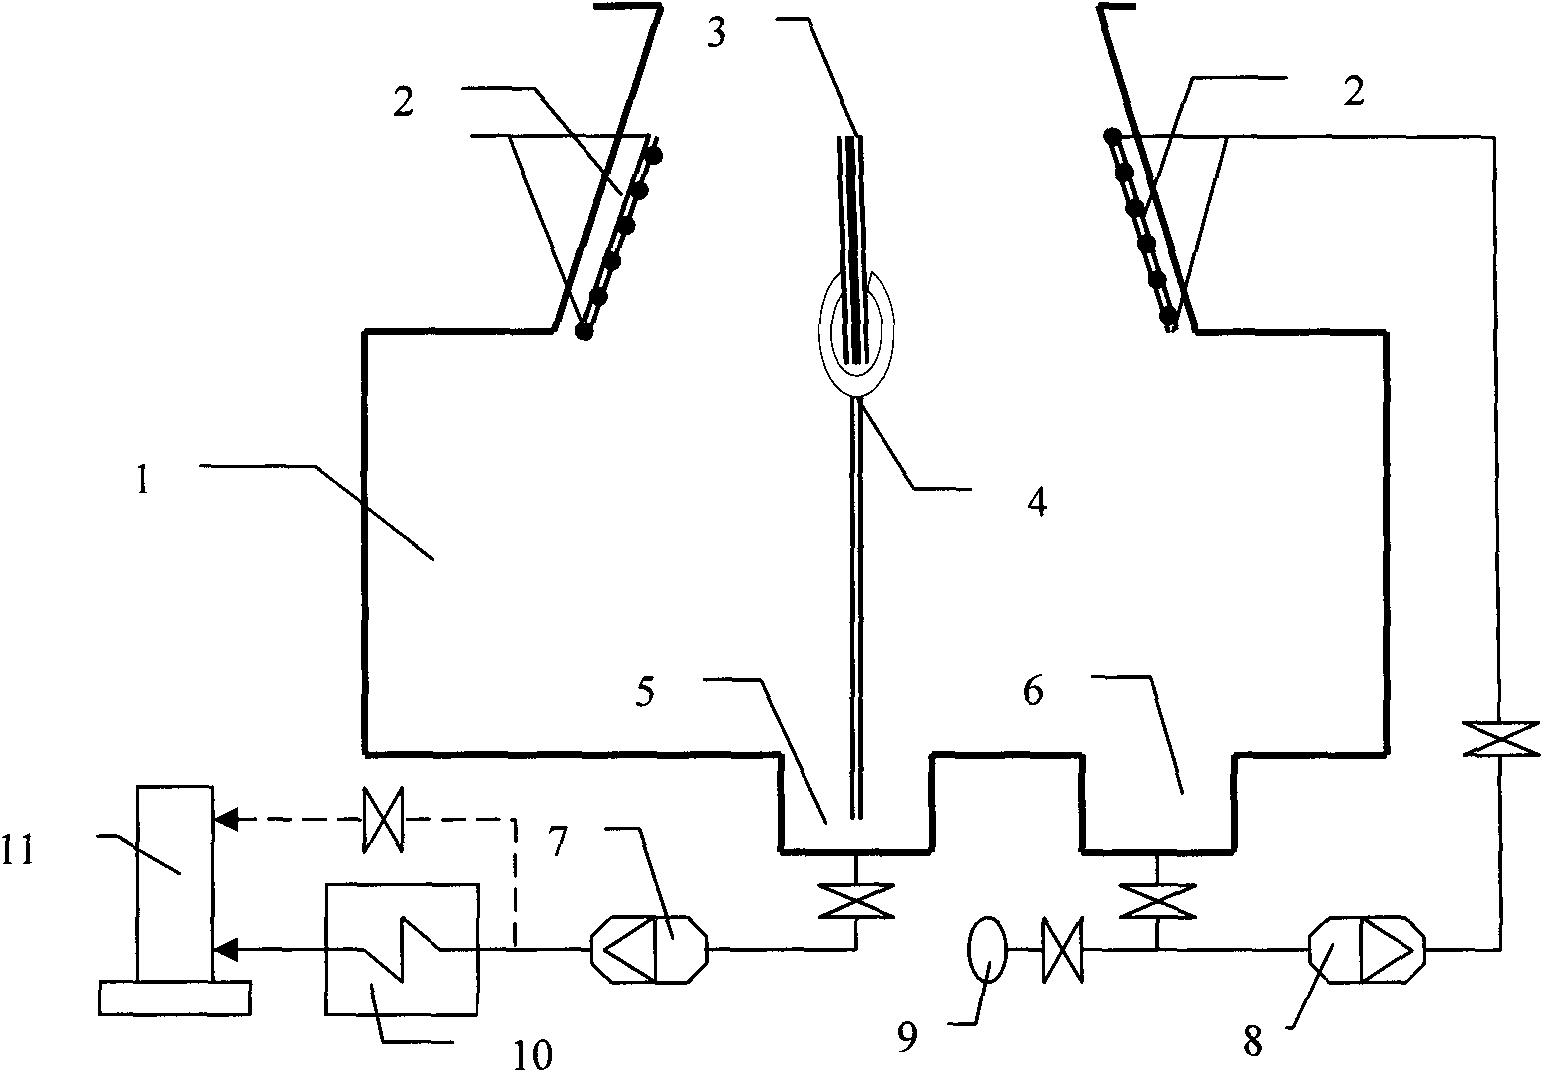 Energy-saving heat exchange system with direct vapor-water mixing